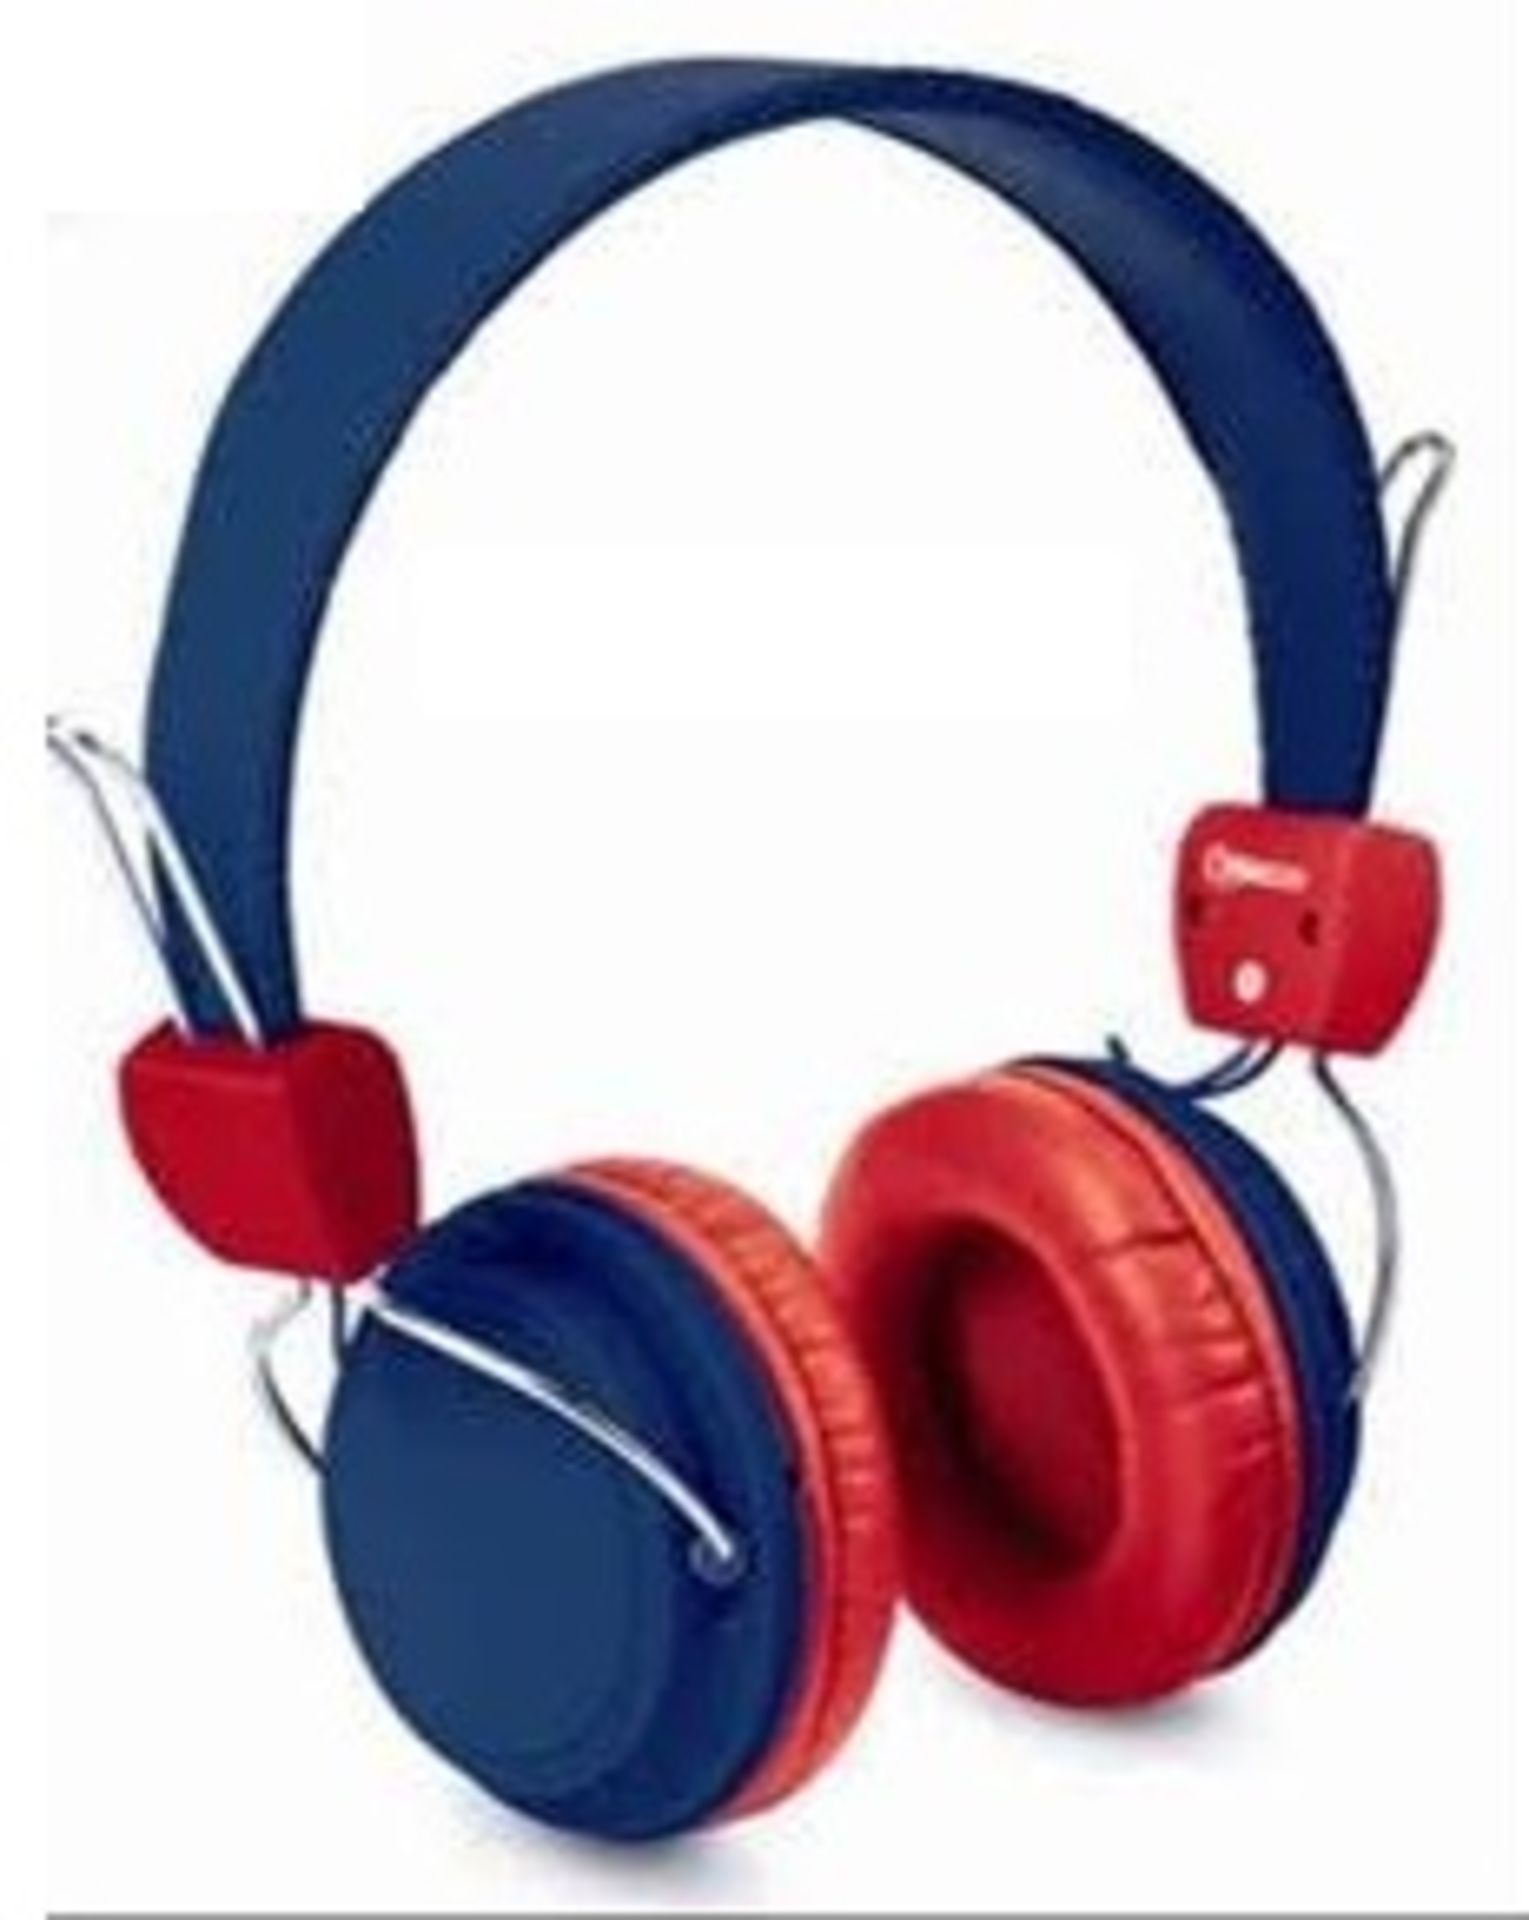 V *TRADE QTY* Brand New KidzSafe by SMS Audio Wired Headphone with Over 50 Removable Designer